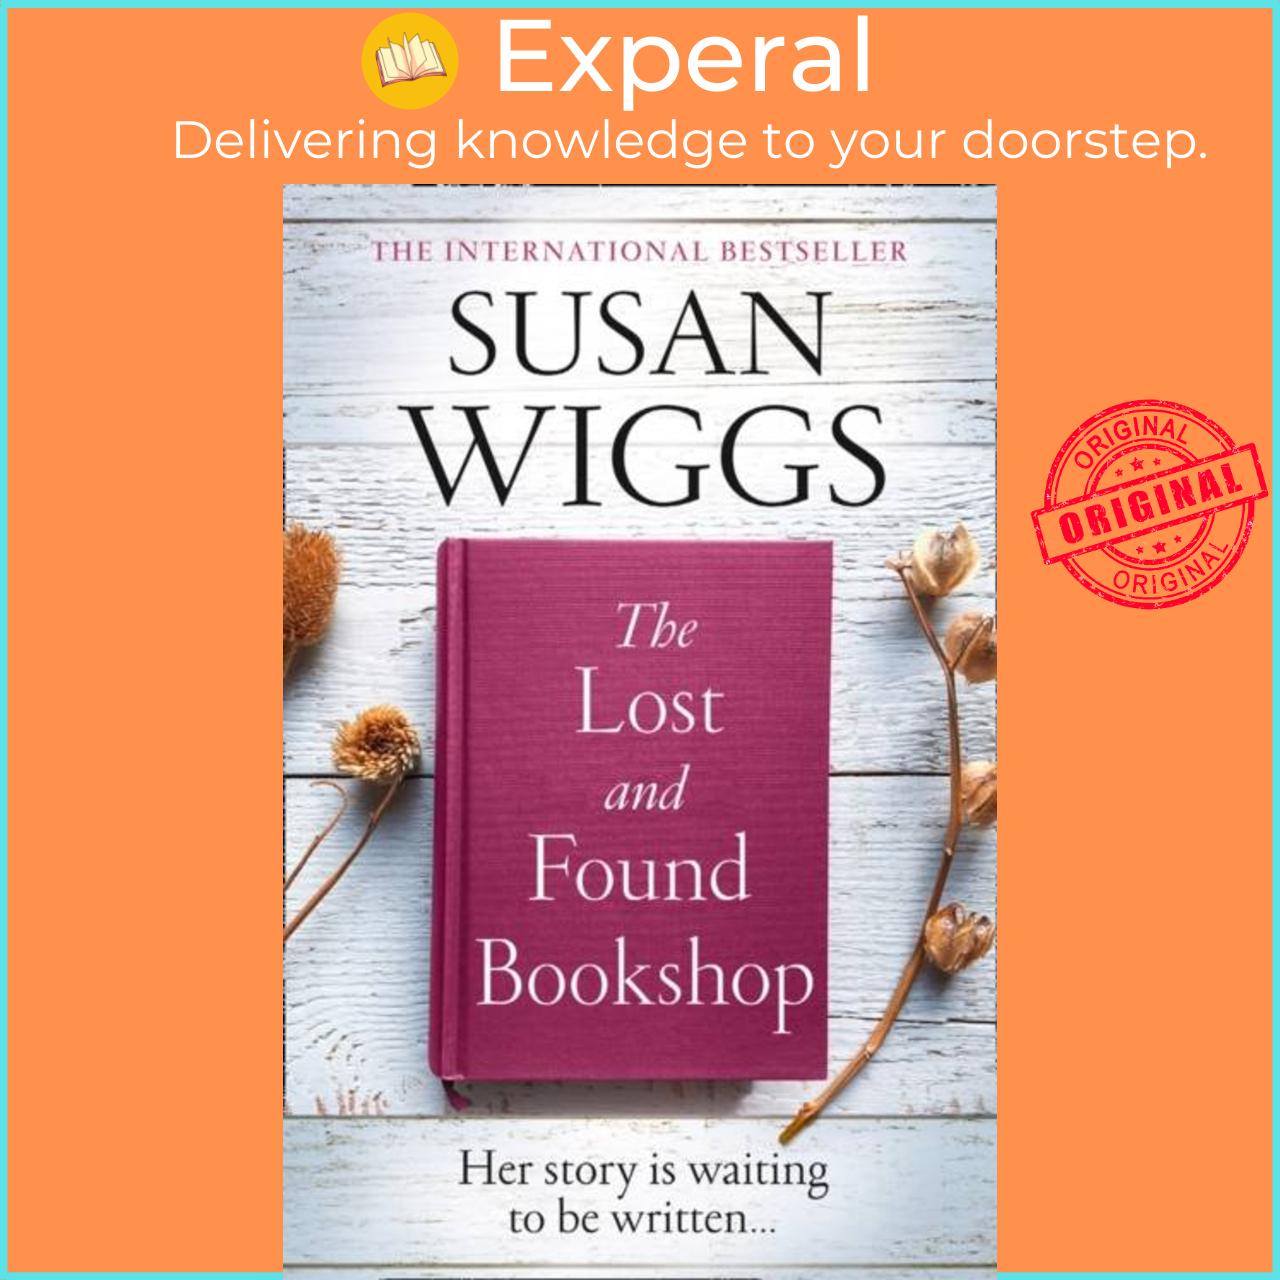 Sách - The Lost and Found Bookshop by Susan Wiggs (UK edition, paperback)